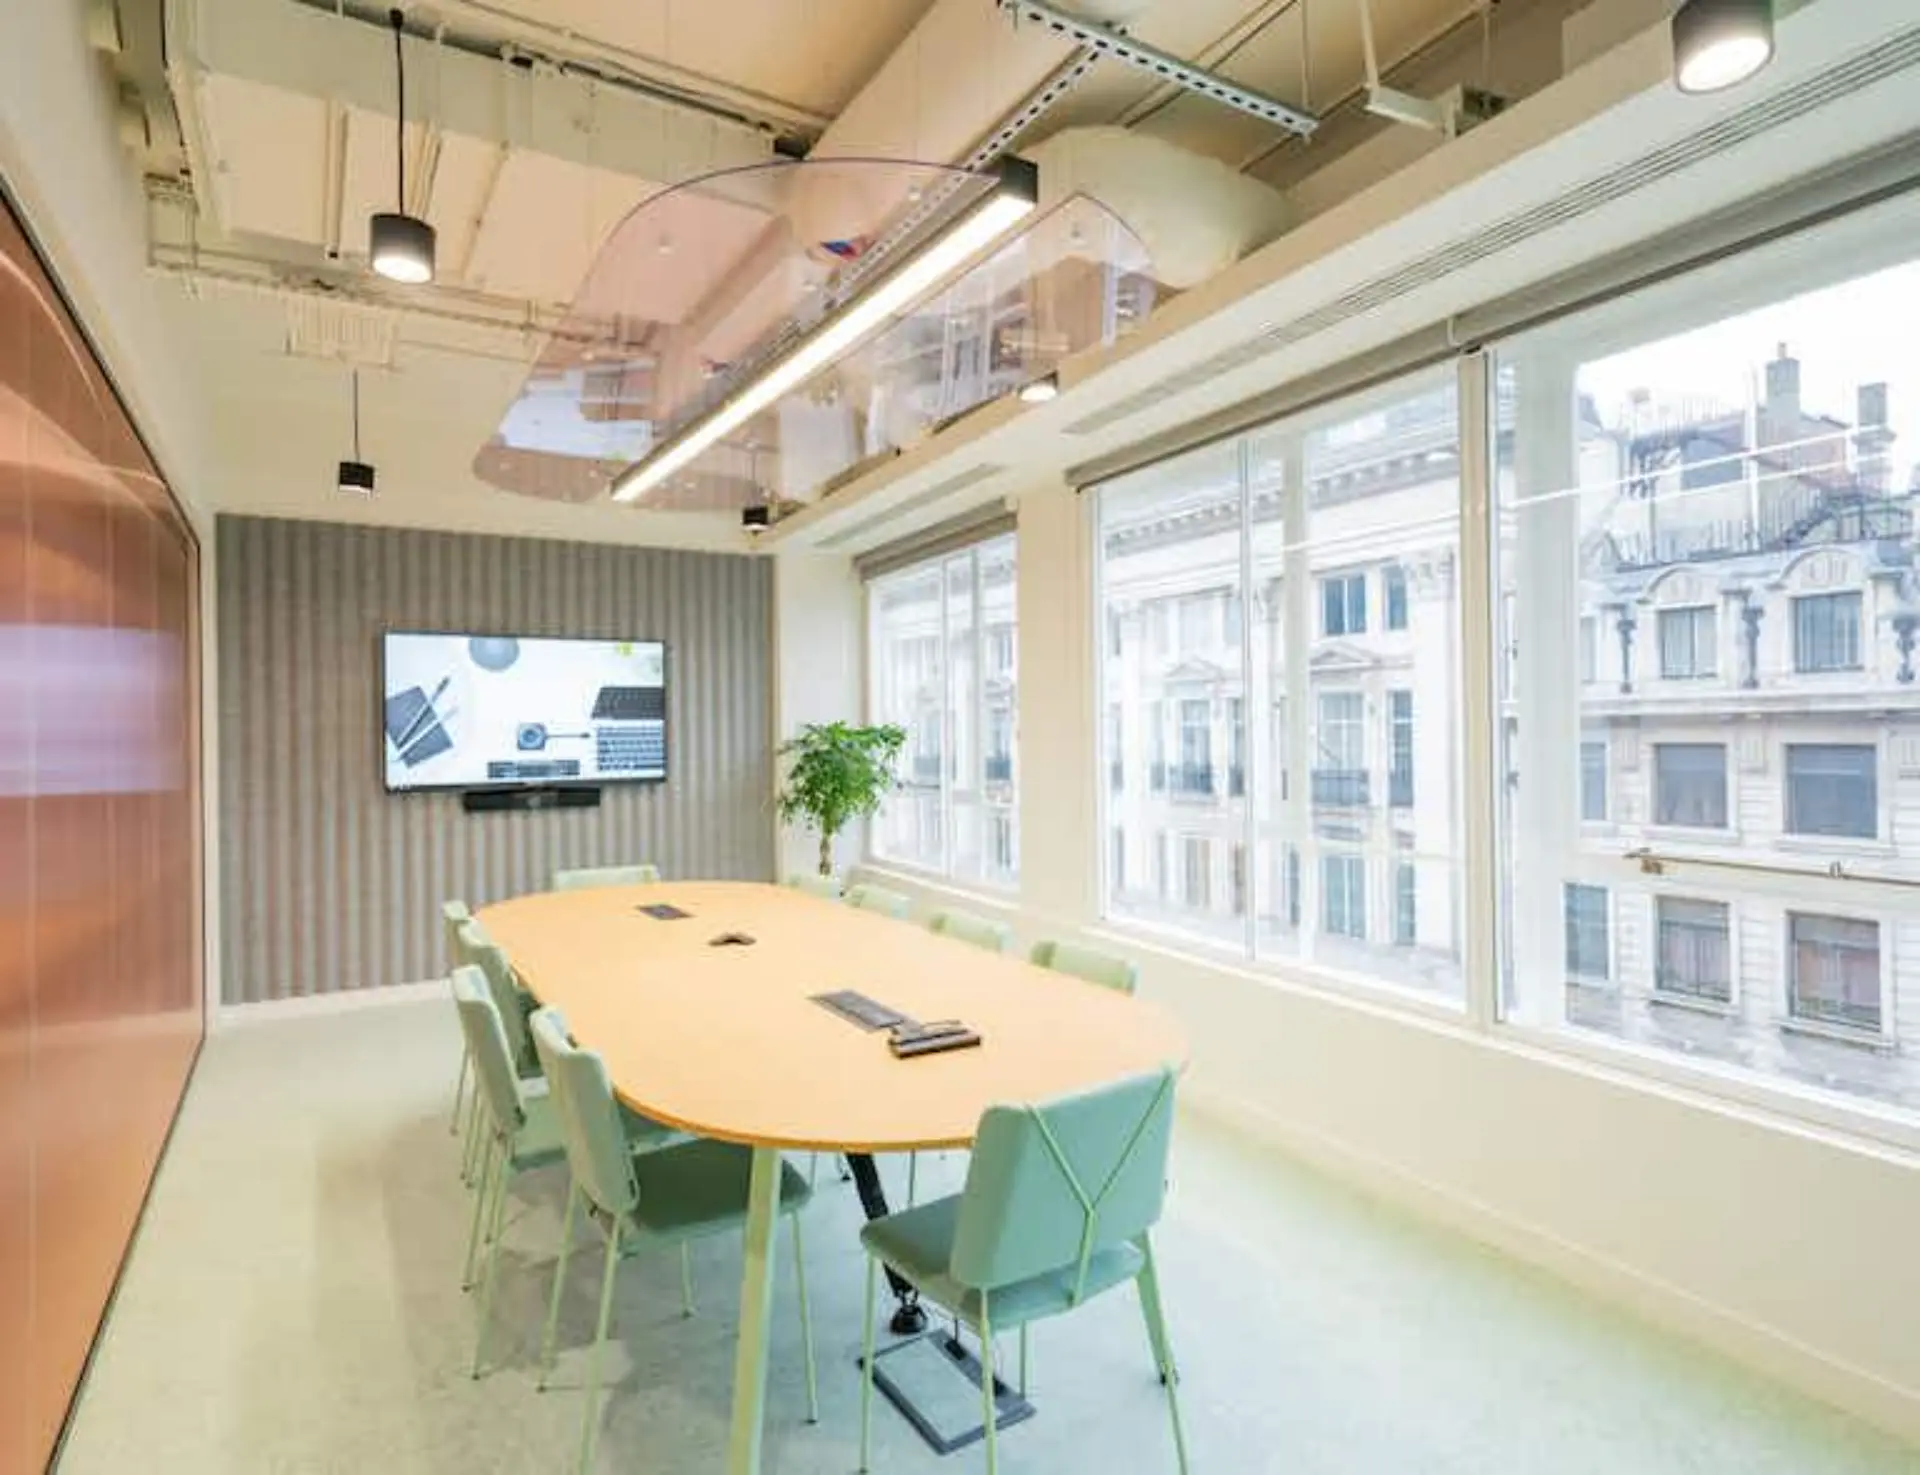 Huckletree Oxford St meeting rooms roomy has a view natural light 